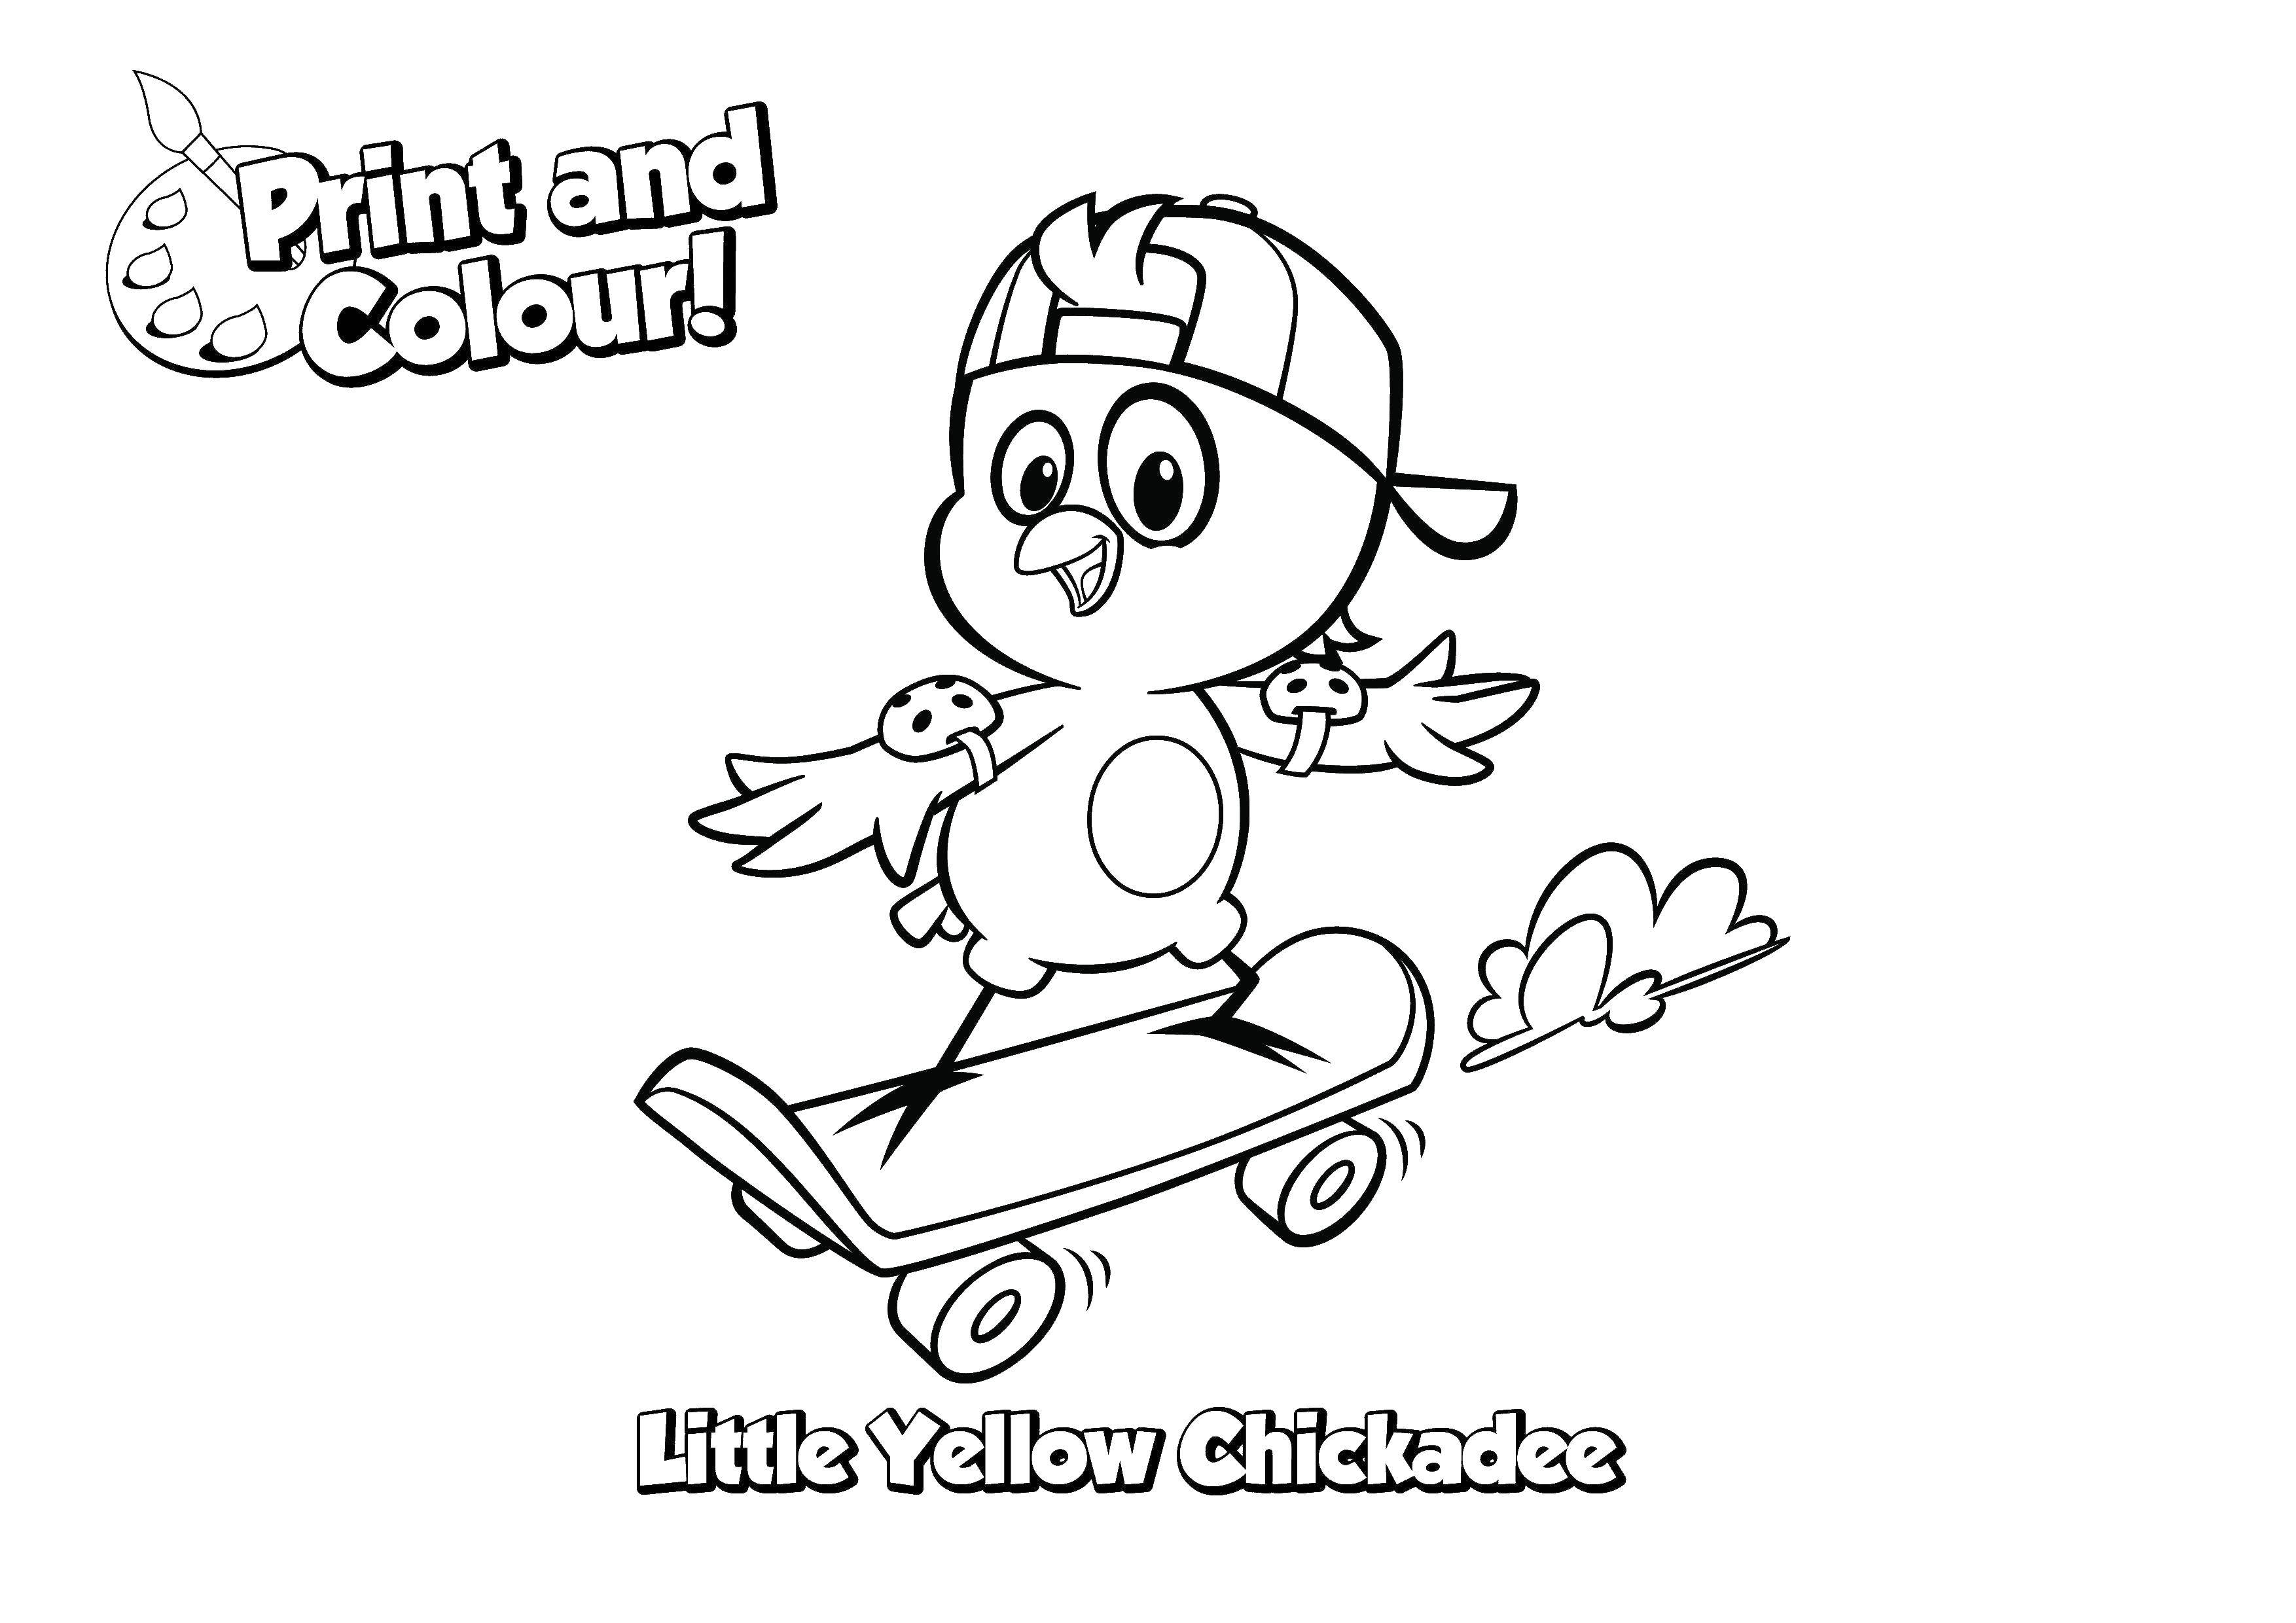 Coloring Chick rides a skateboard. Category birds. Tags:  chick, bird.